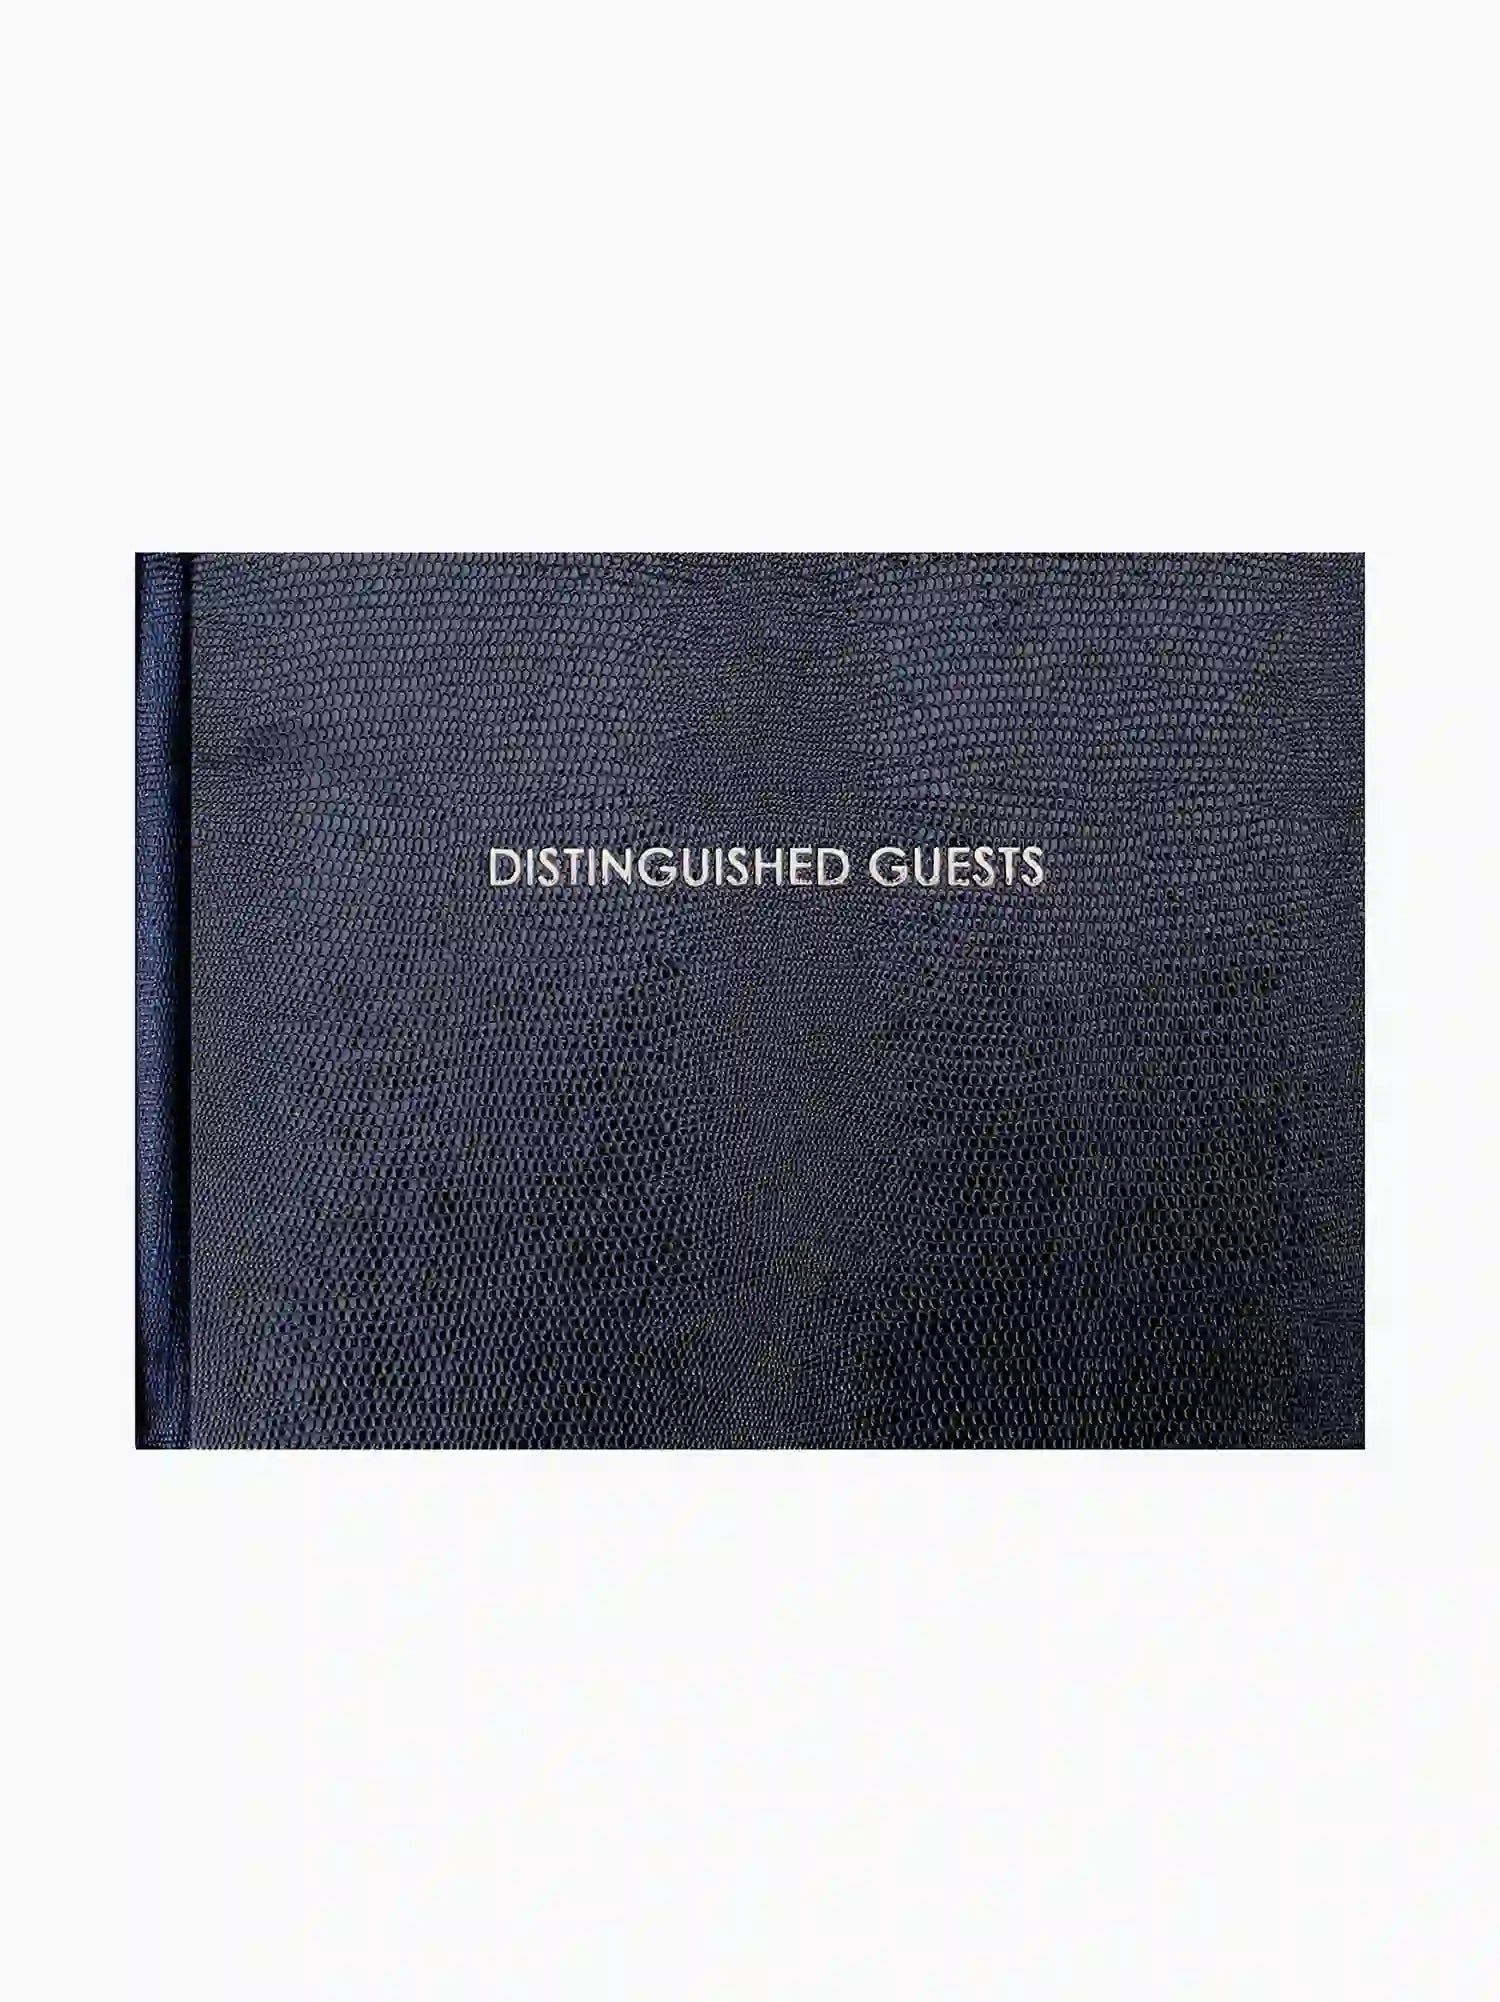 Distinguished Guest Book